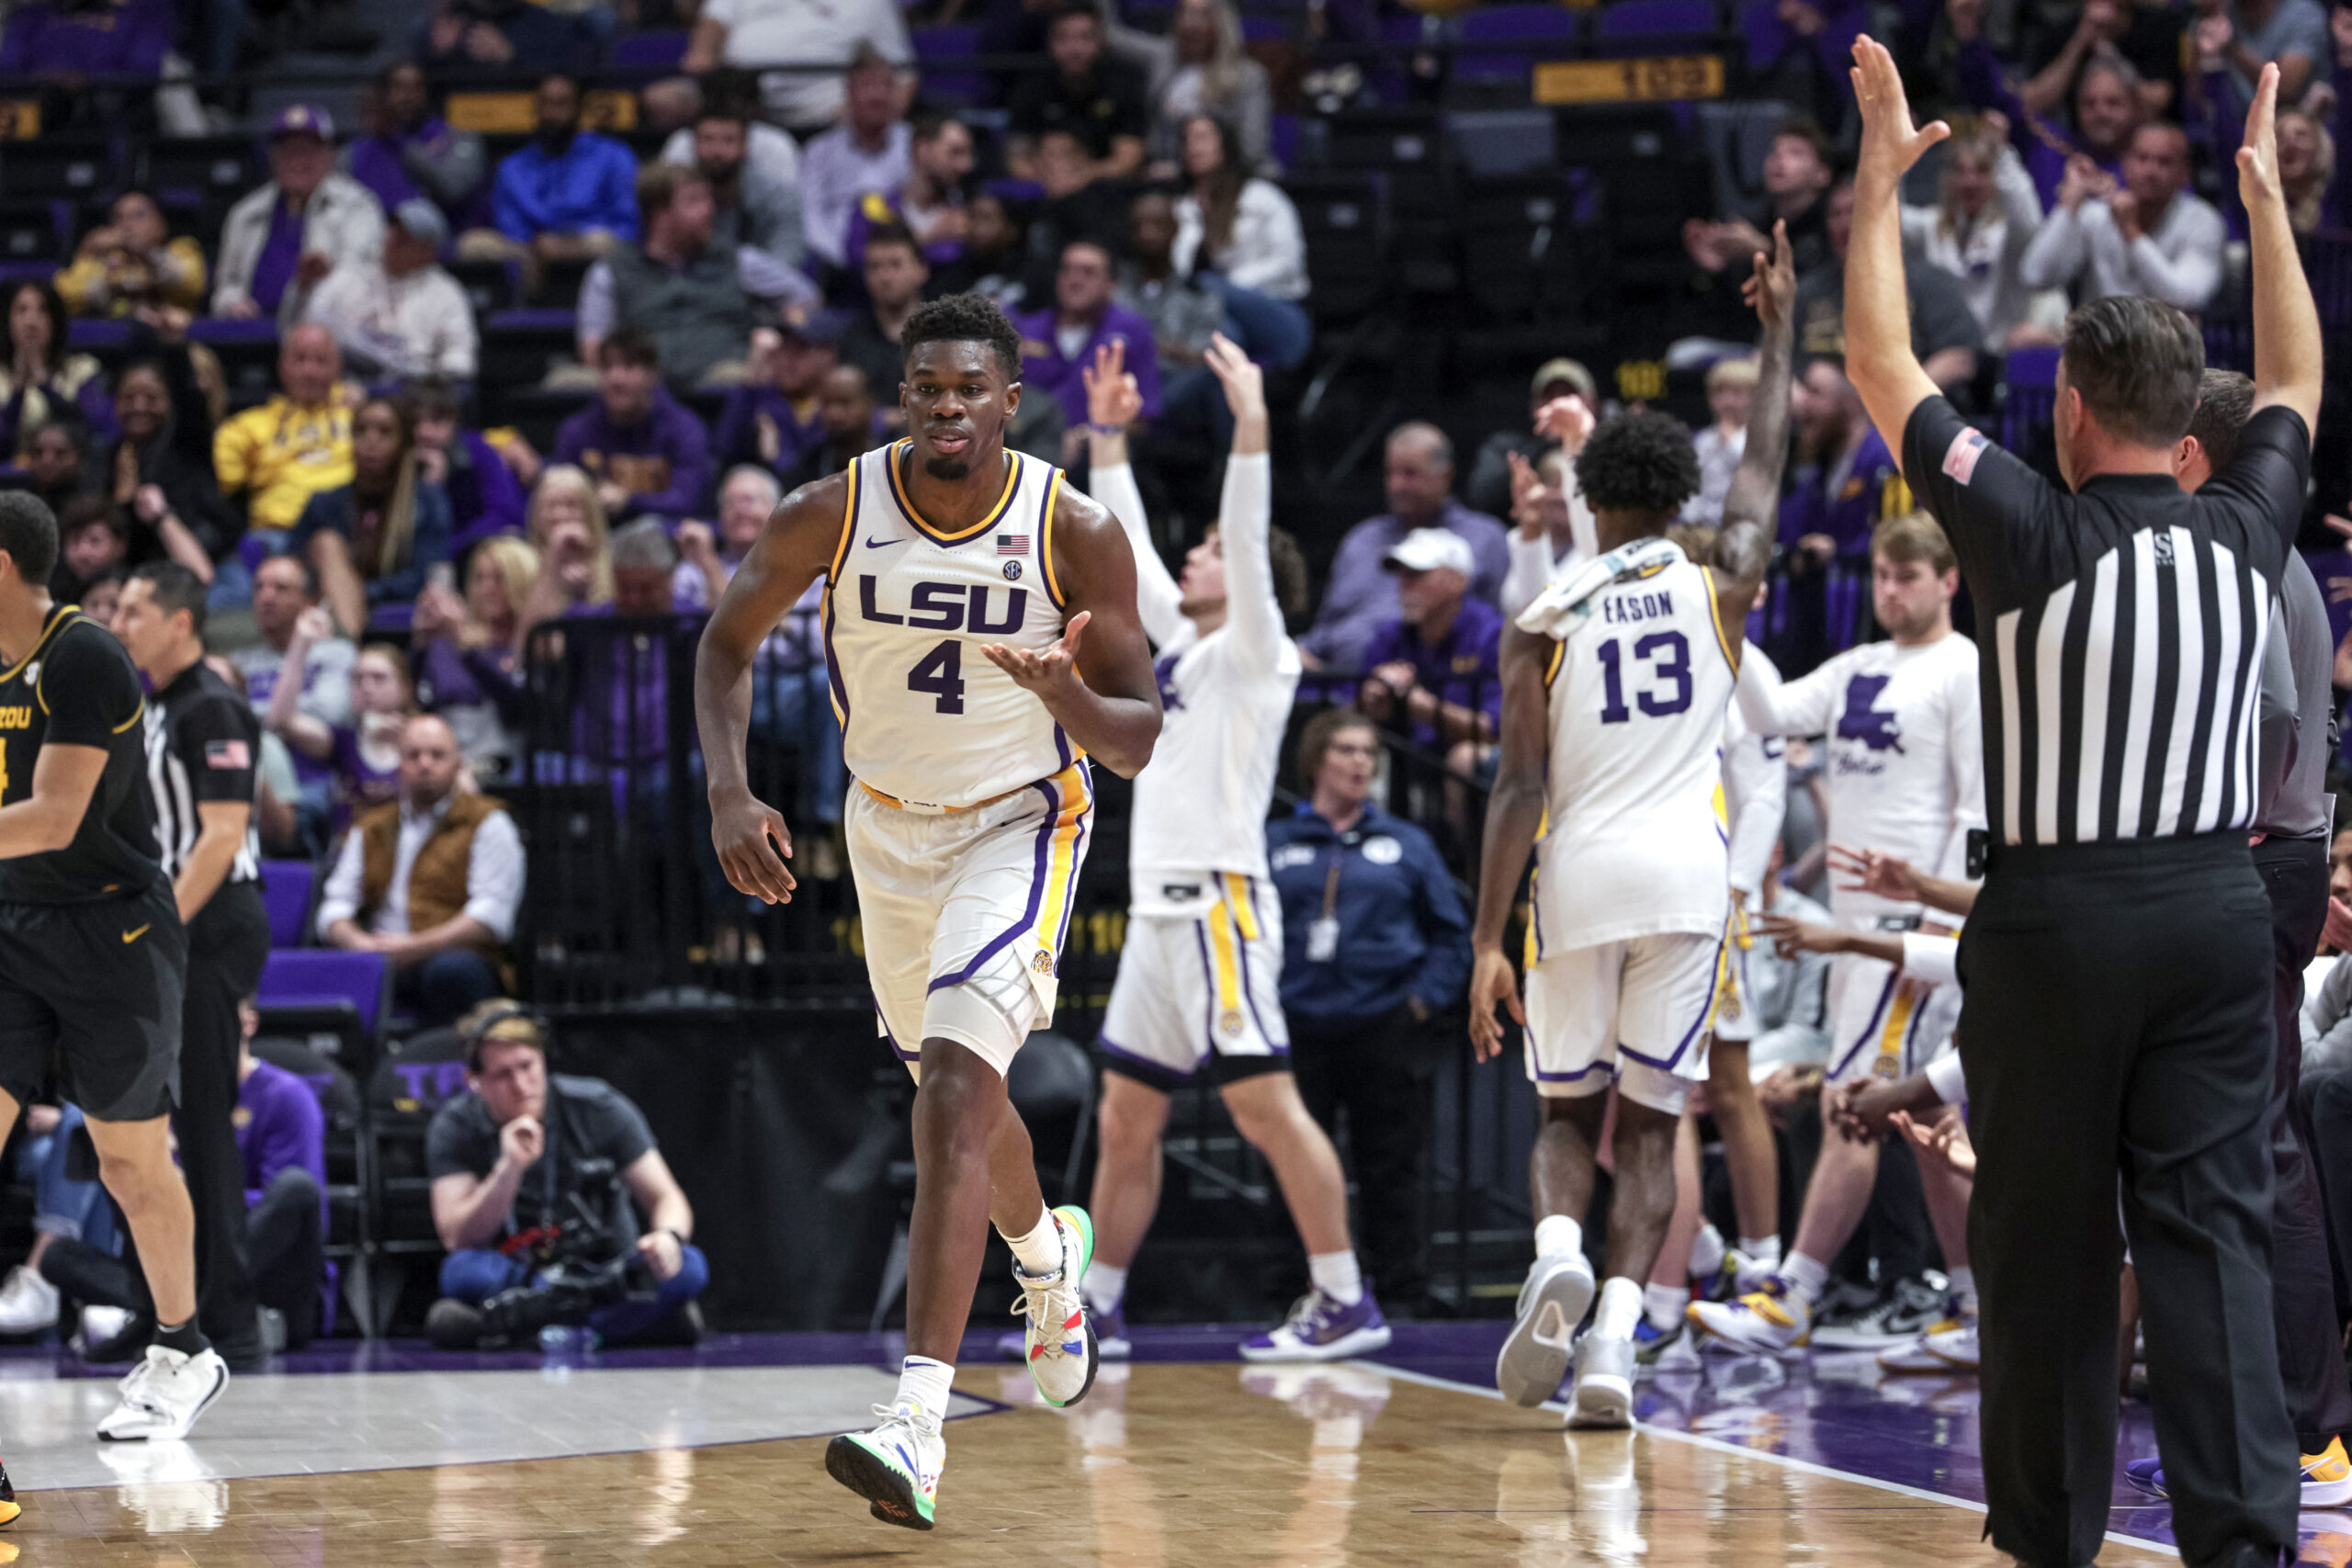 Where LSU stands in latest bracket projections